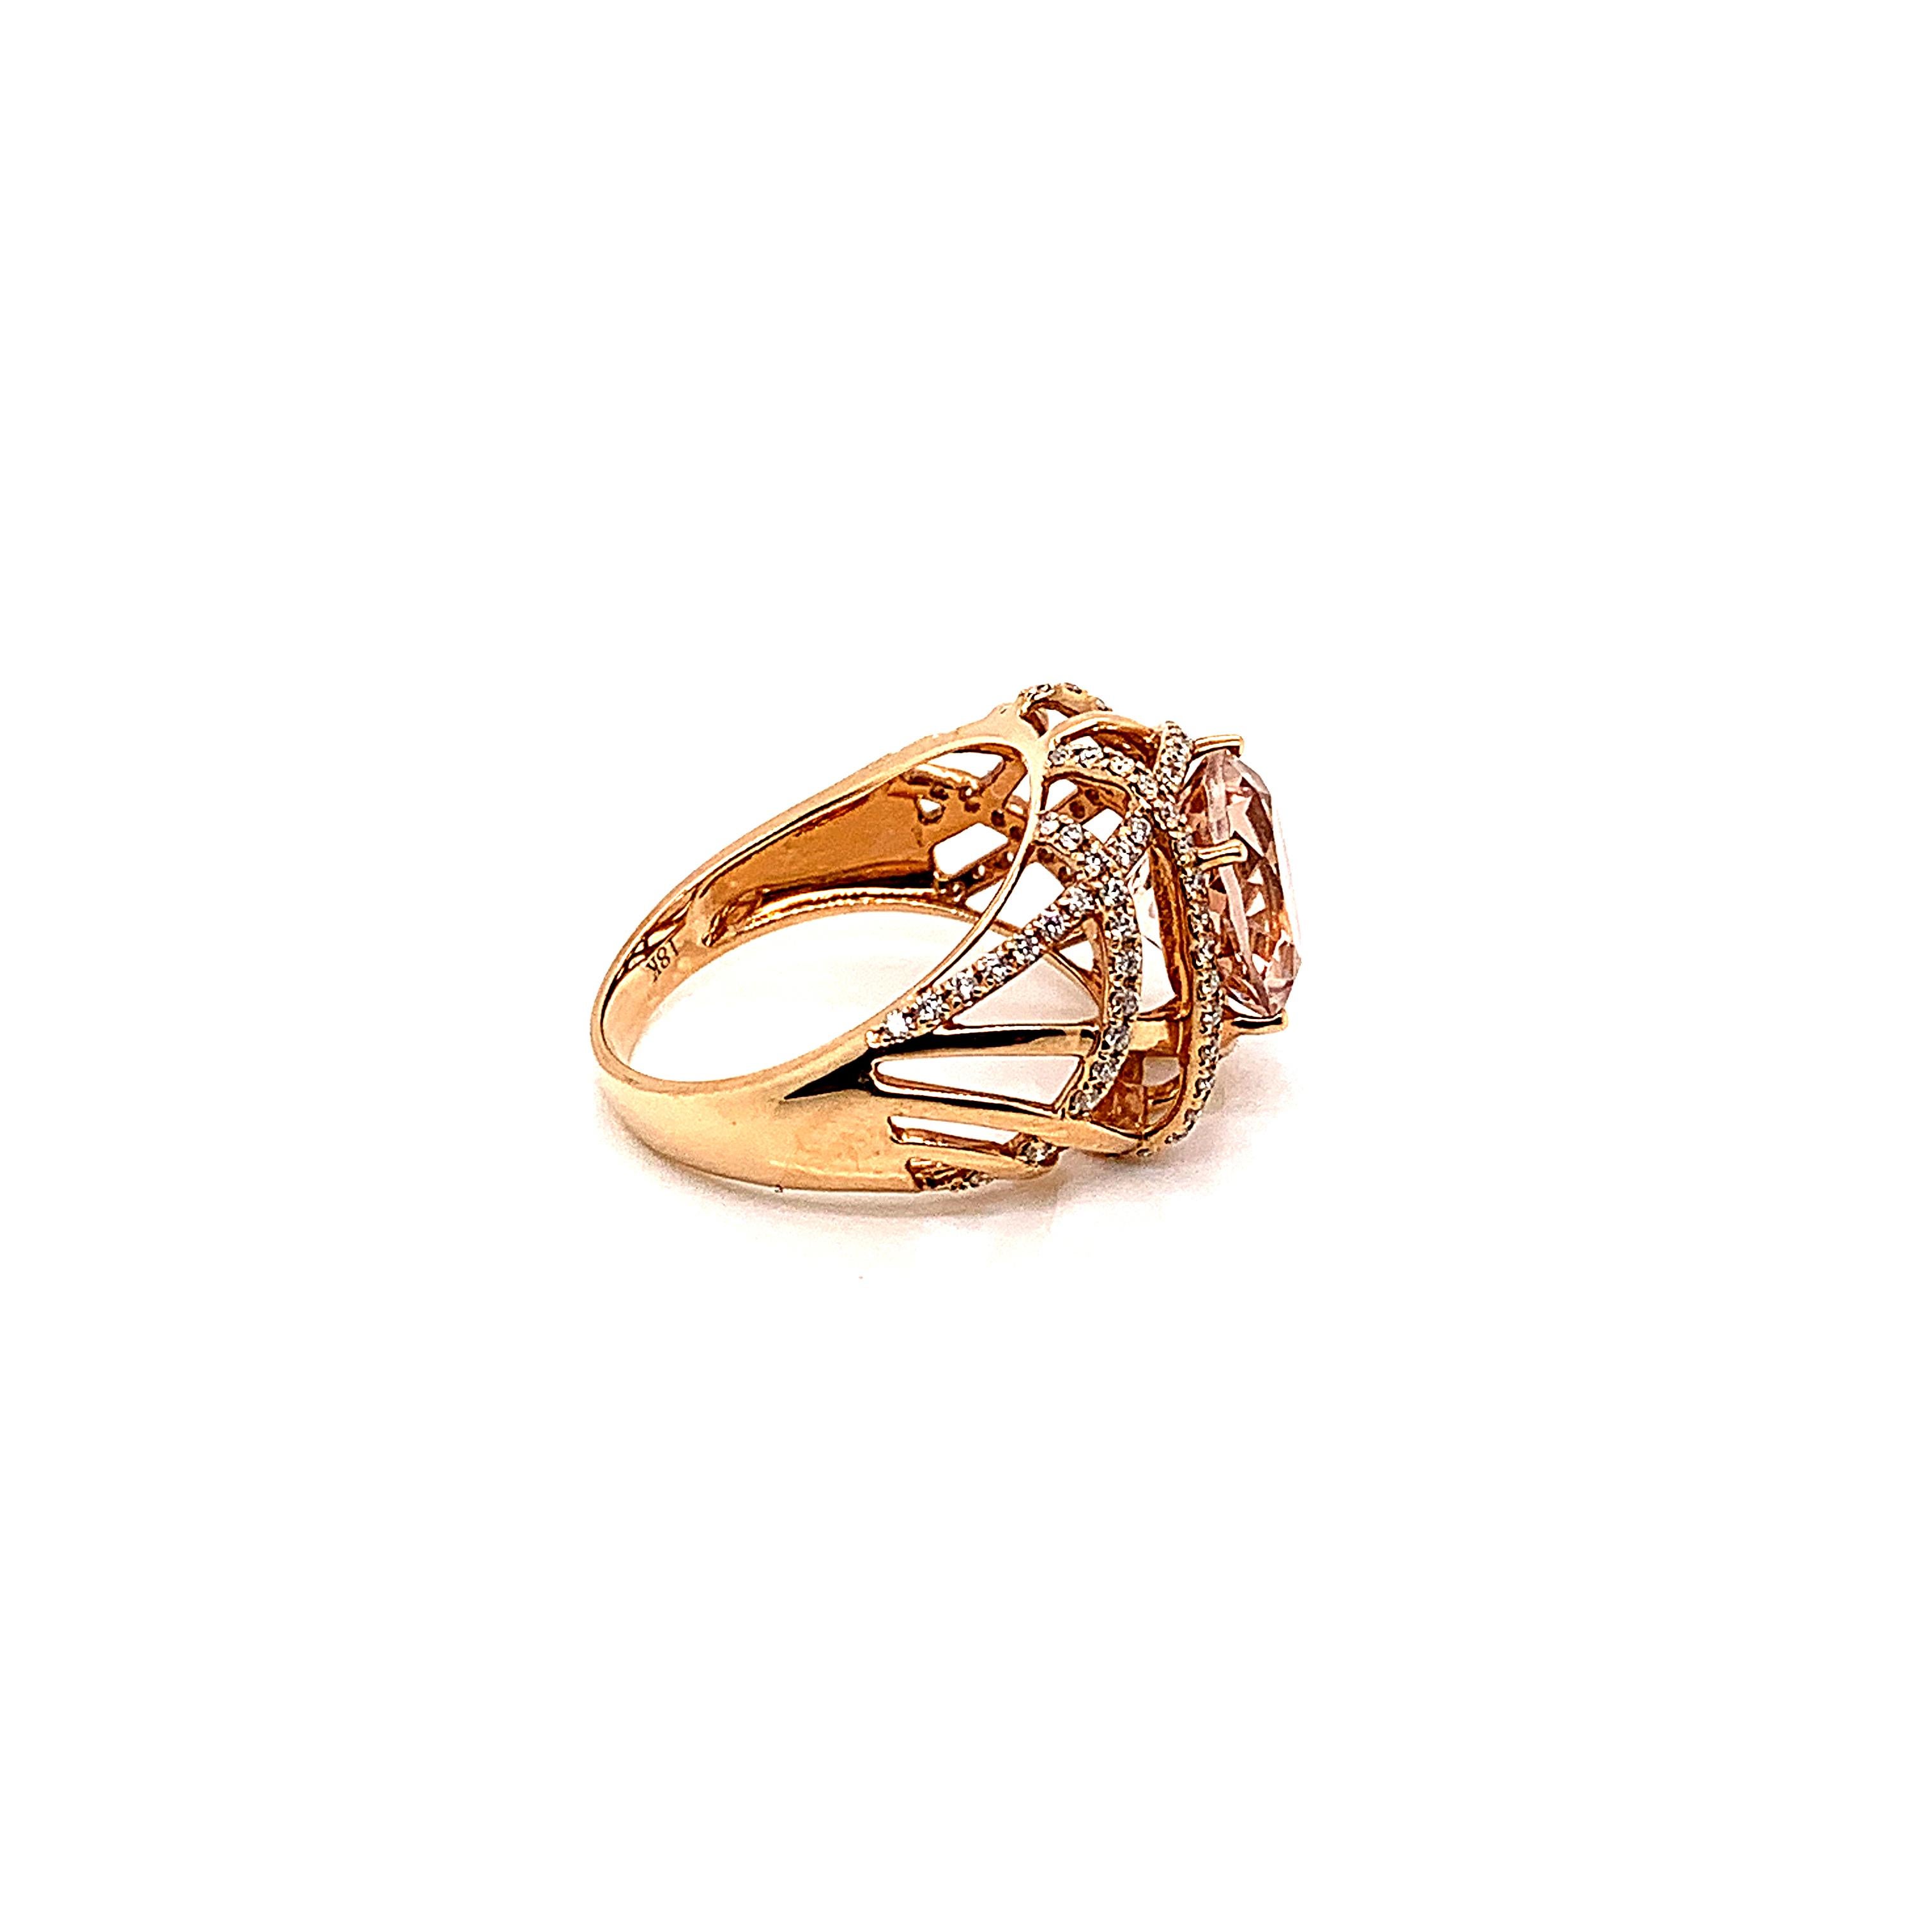 Contemporary 3.4 Carat Morganite Ring in 18 Karat Rose Gold with Diamond For Sale